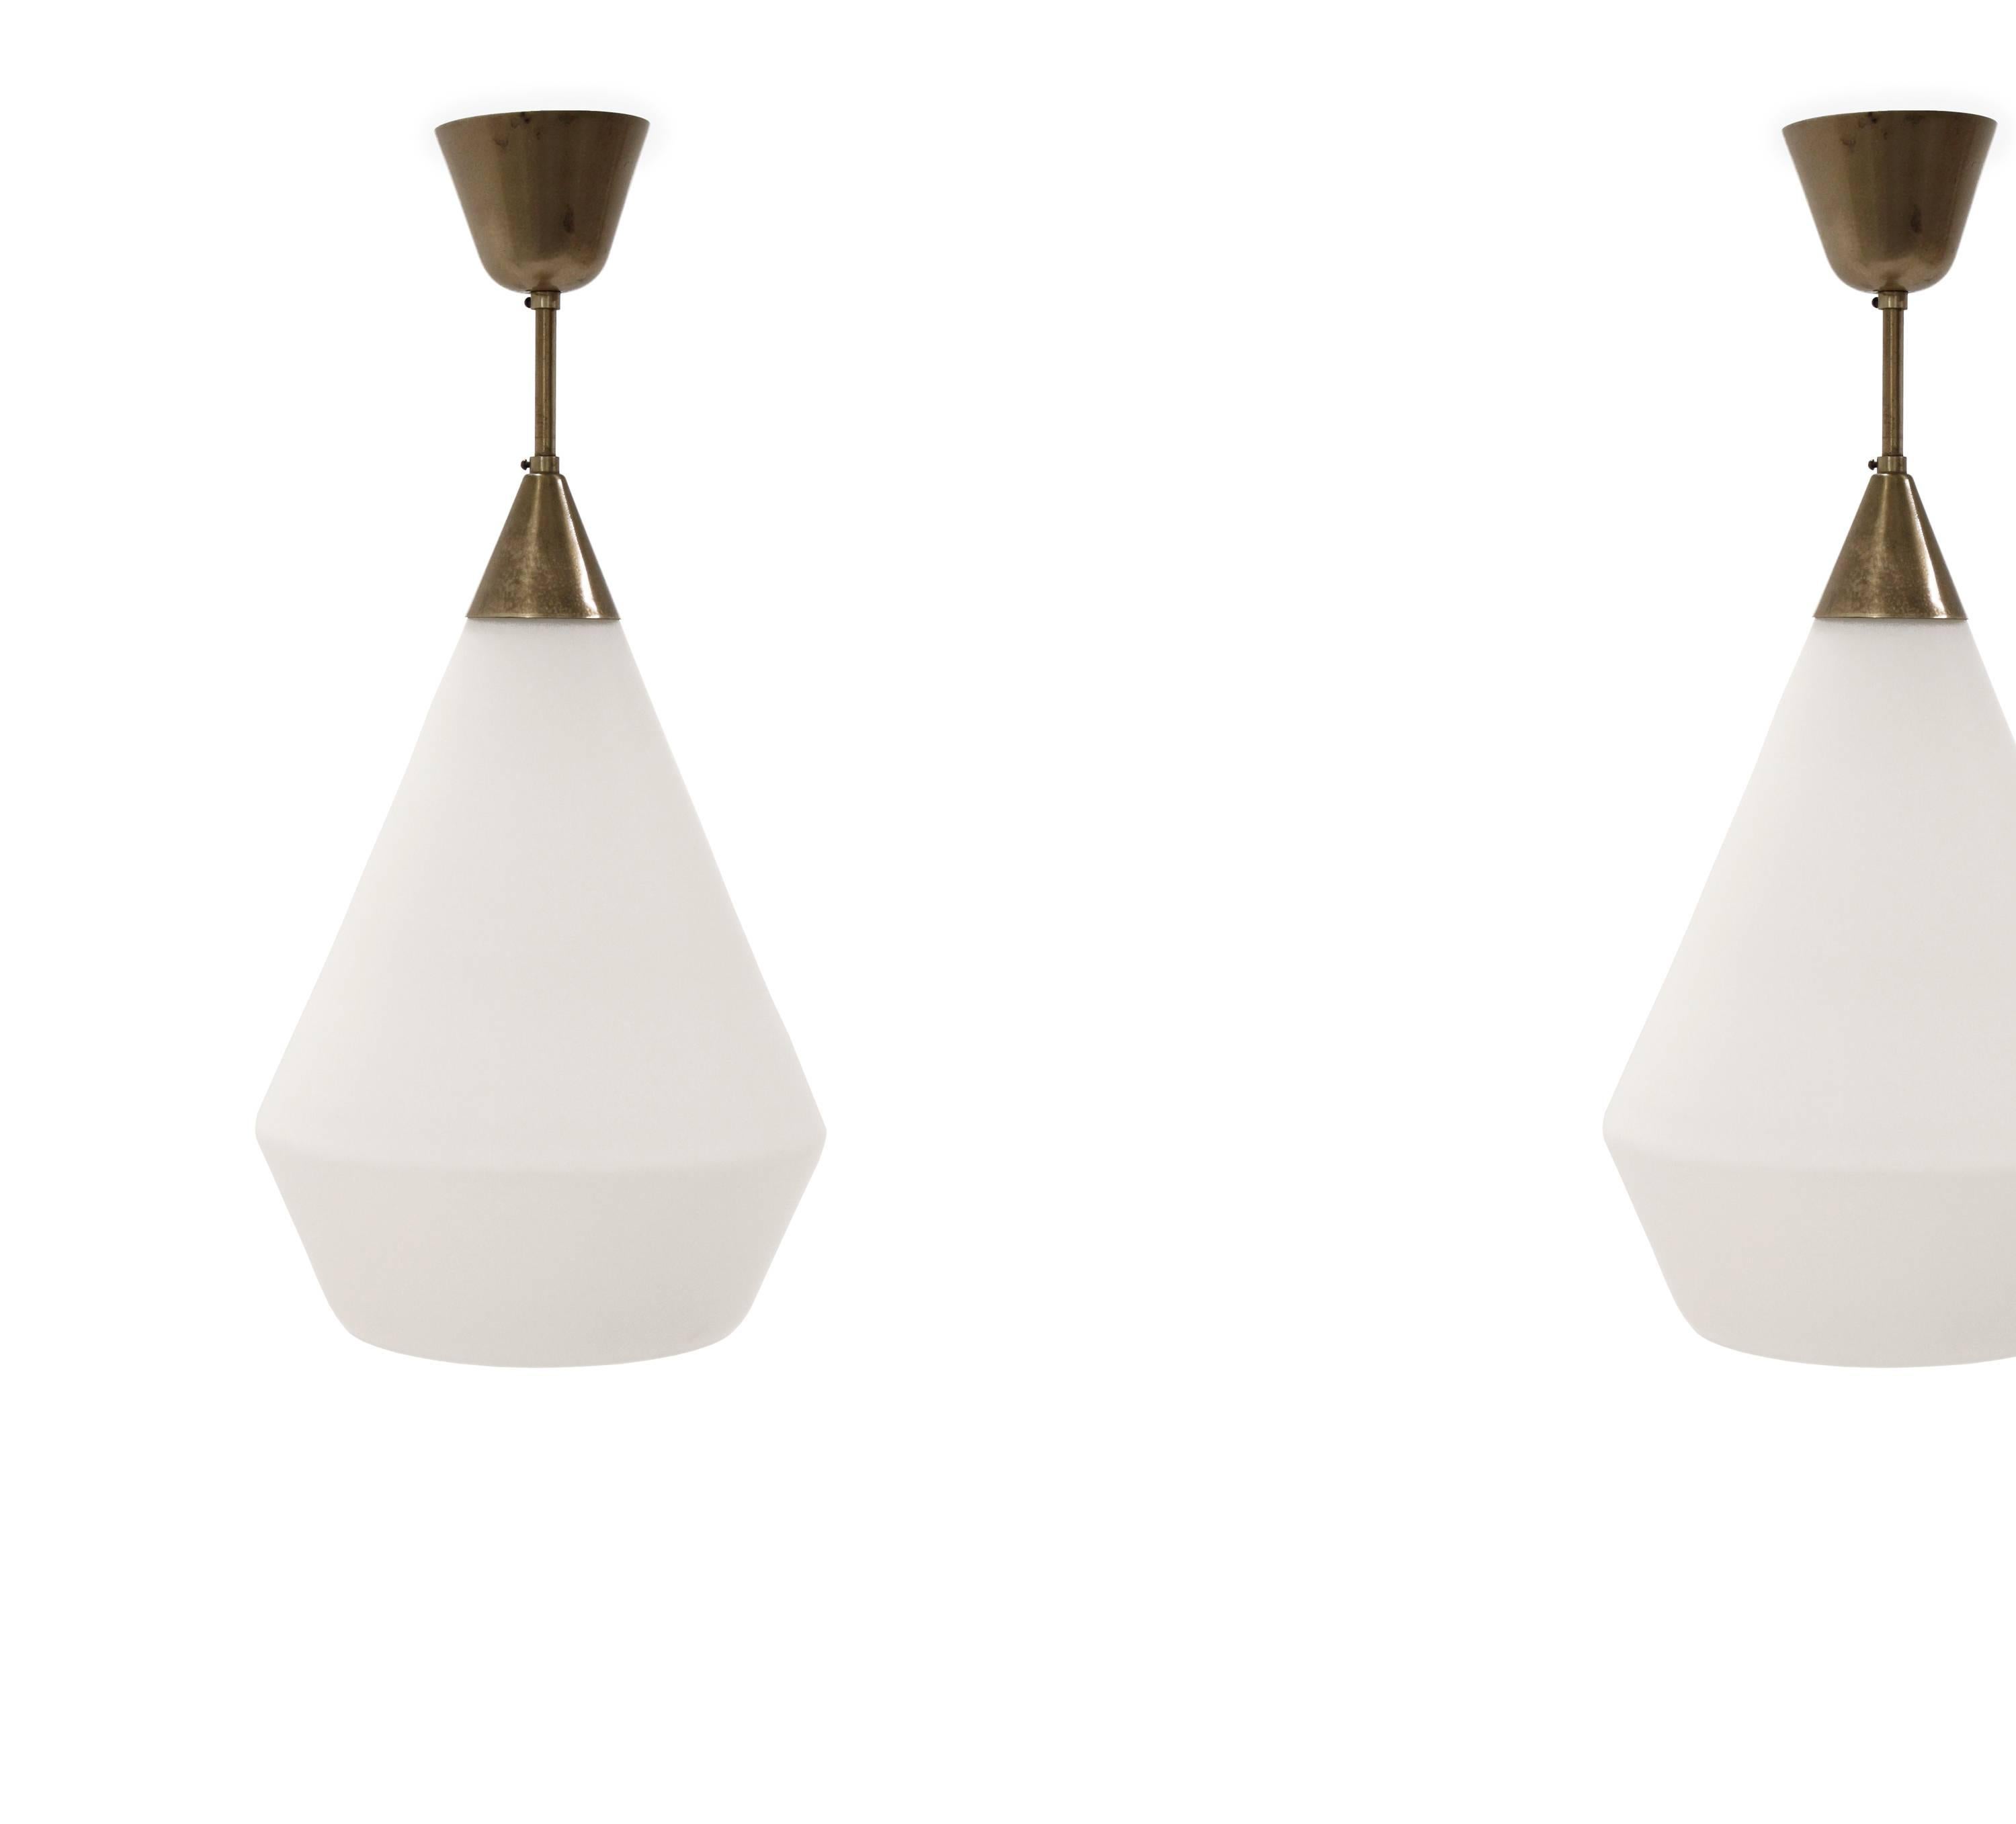 Pair of large ceiling pendants with shades in opaline glass and brass stem.

Designed by Birger Dahl and made in Norway by Sønnico in the late 1960s.

Both lamps are fully working and in good vintage condition.